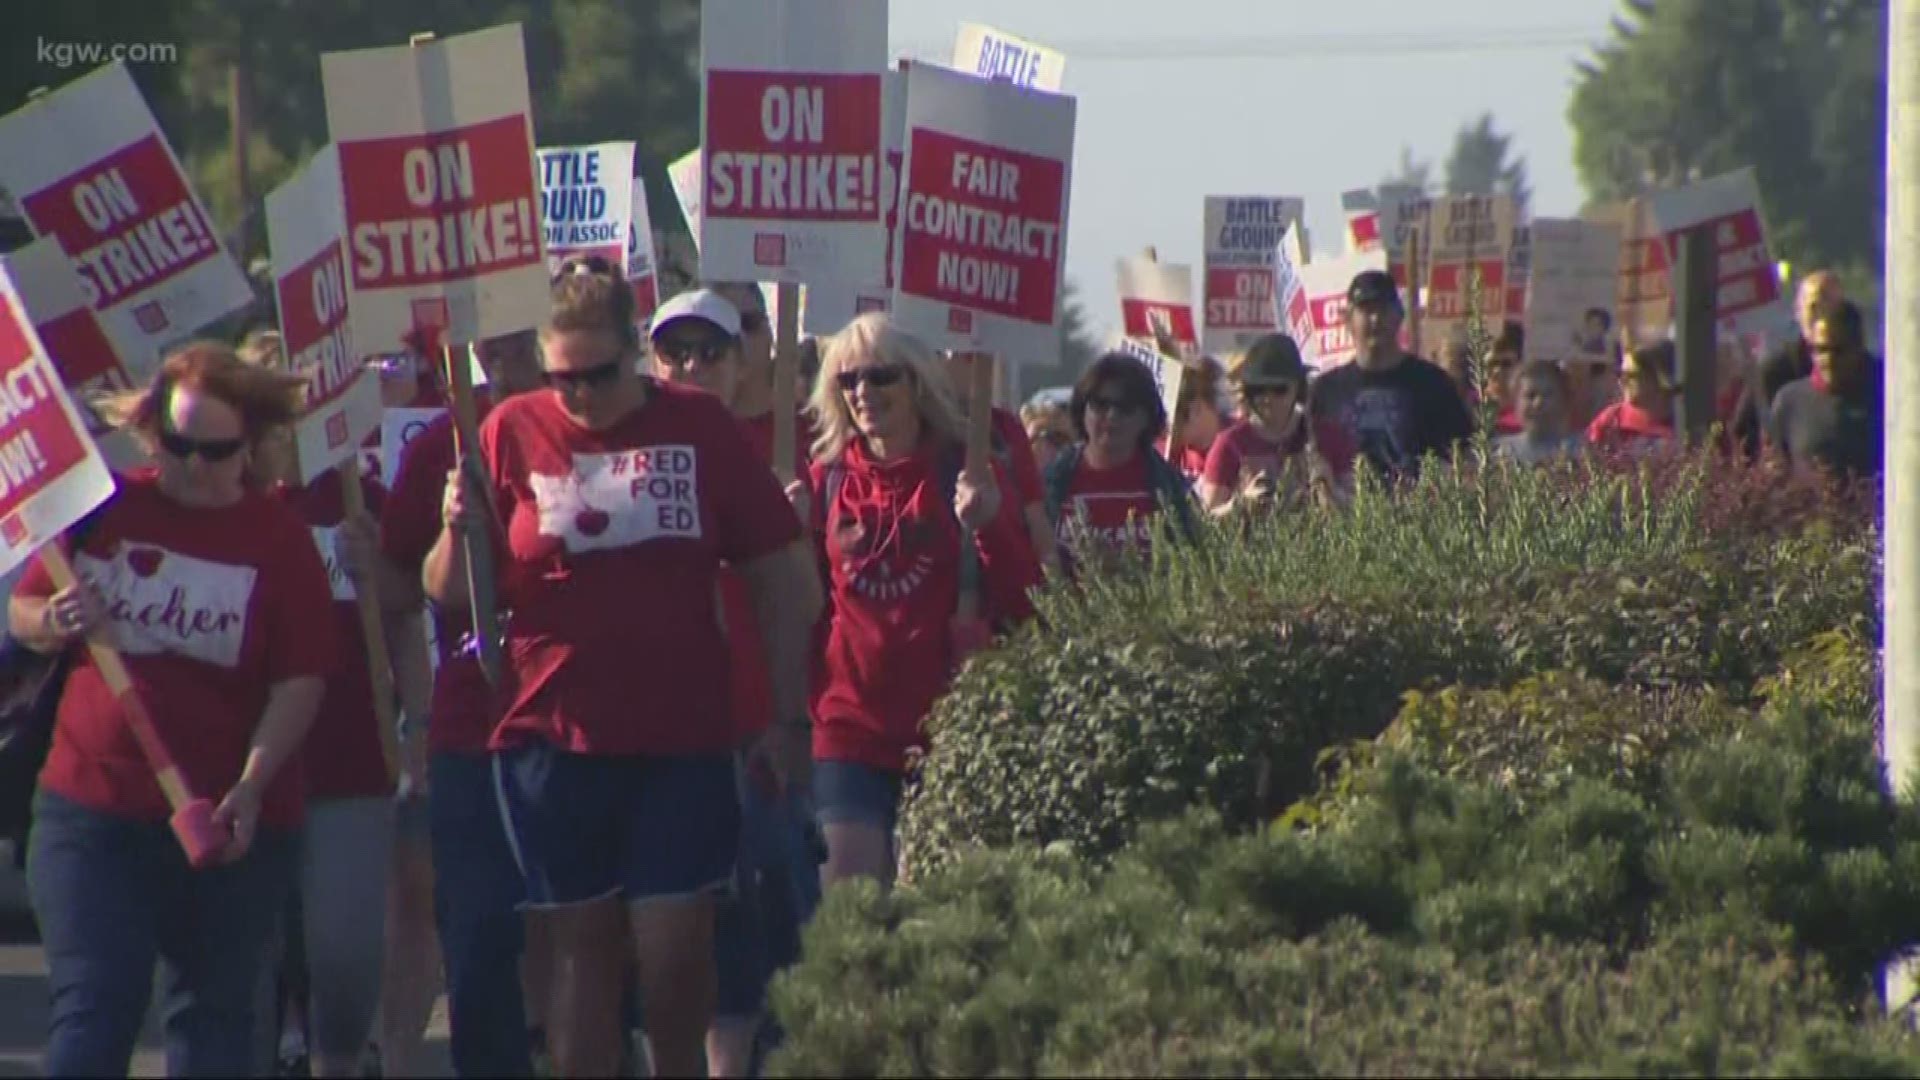 Striking Battle Ground school teachers marched through town to draw attention to a contract impasse.